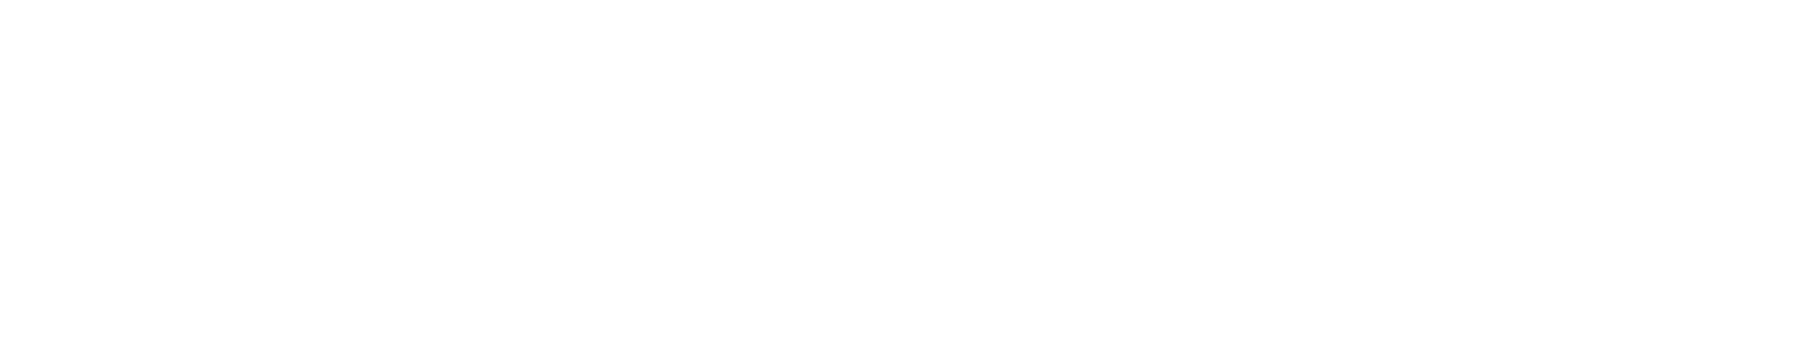 Office of the Advocate for Small Business Capital Formation